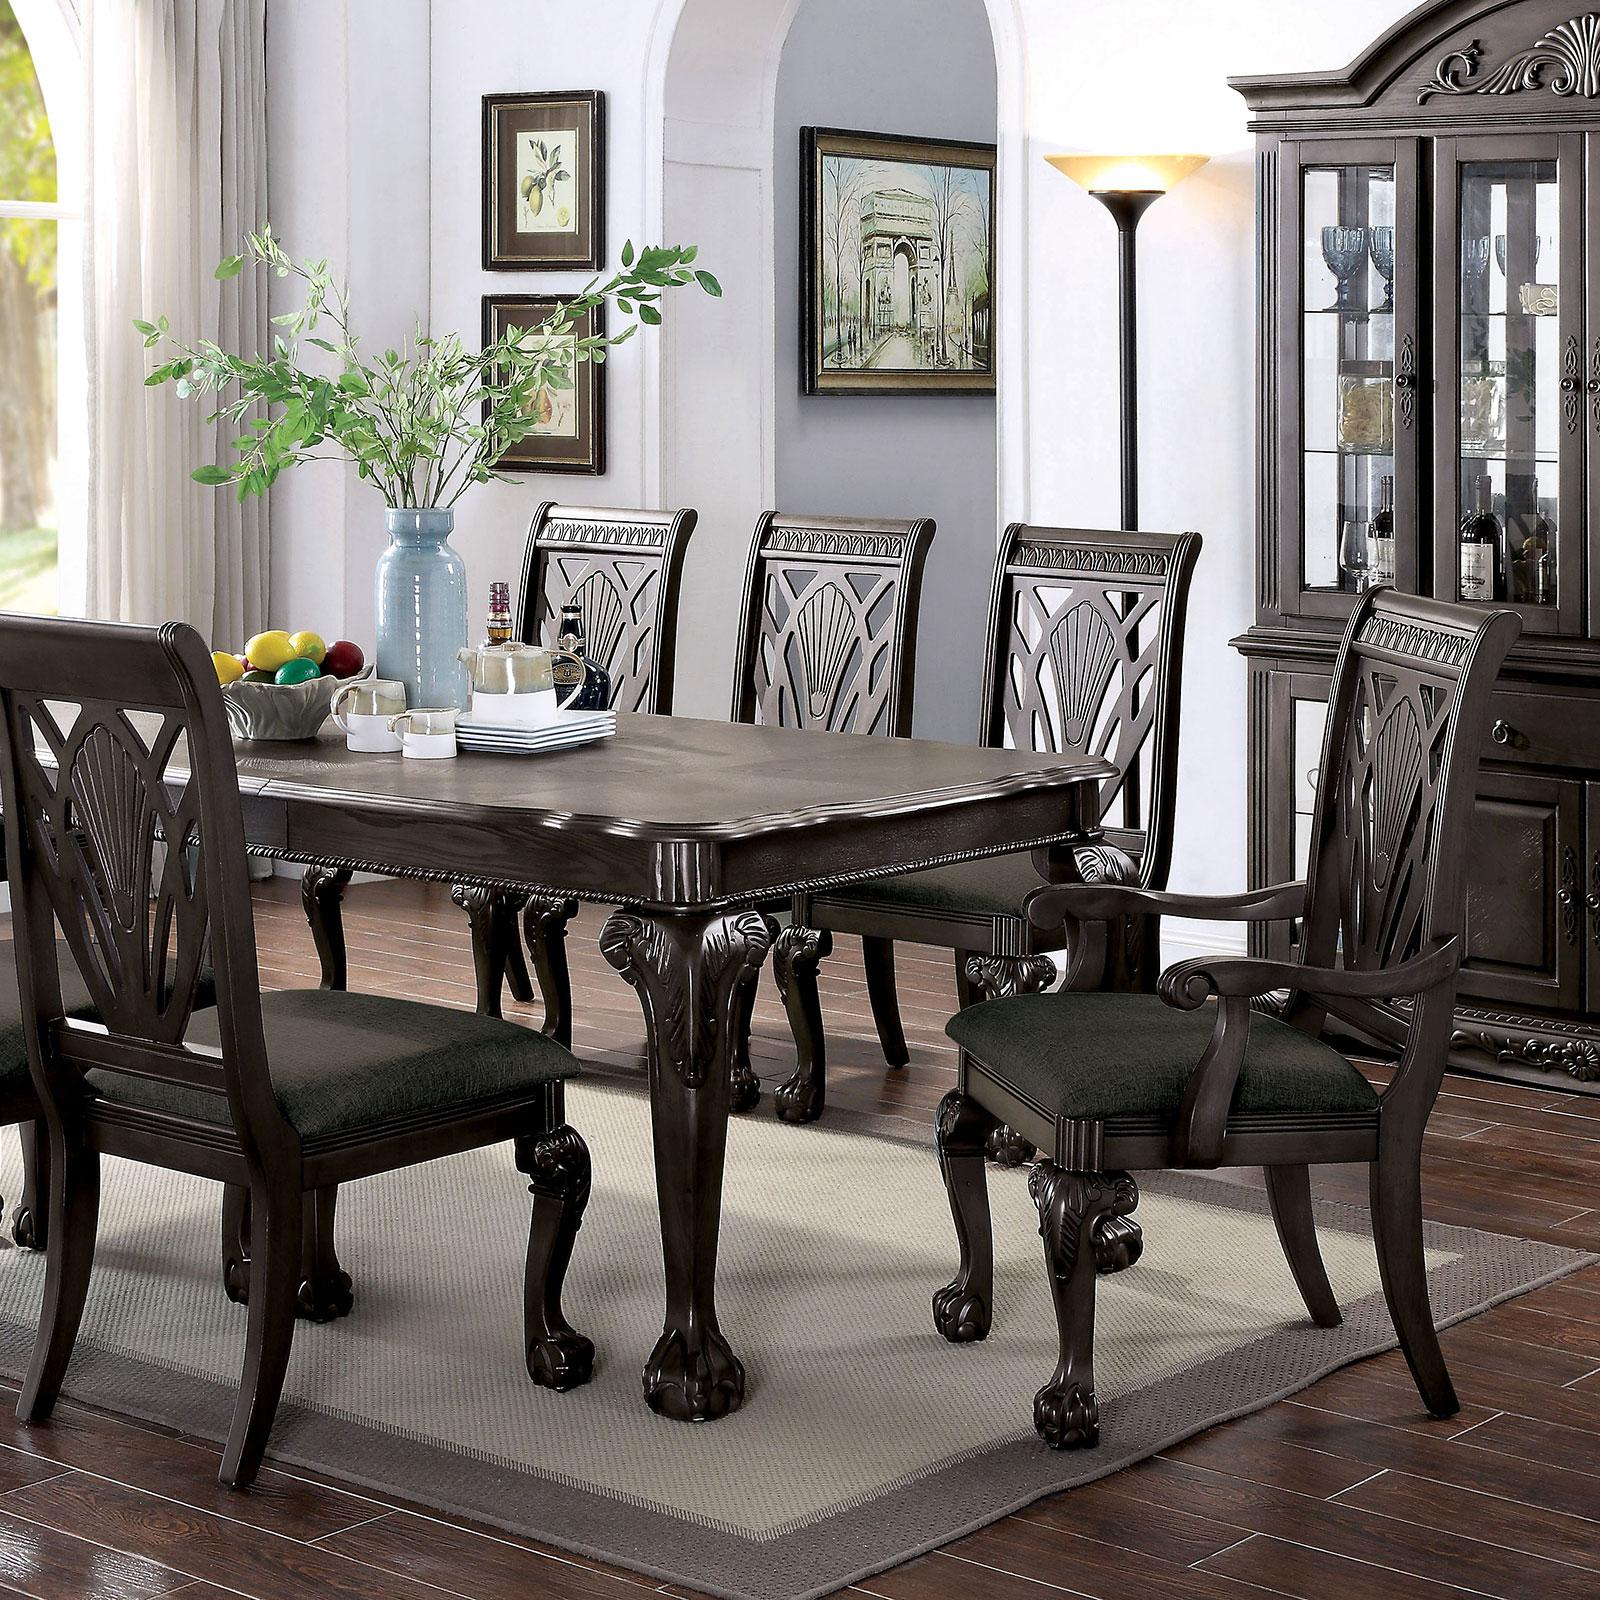 Traditional Dining Table Set CM3185DG-T-Set-9 Petersburg CM3185DG-T-9PC in Gray Fabric